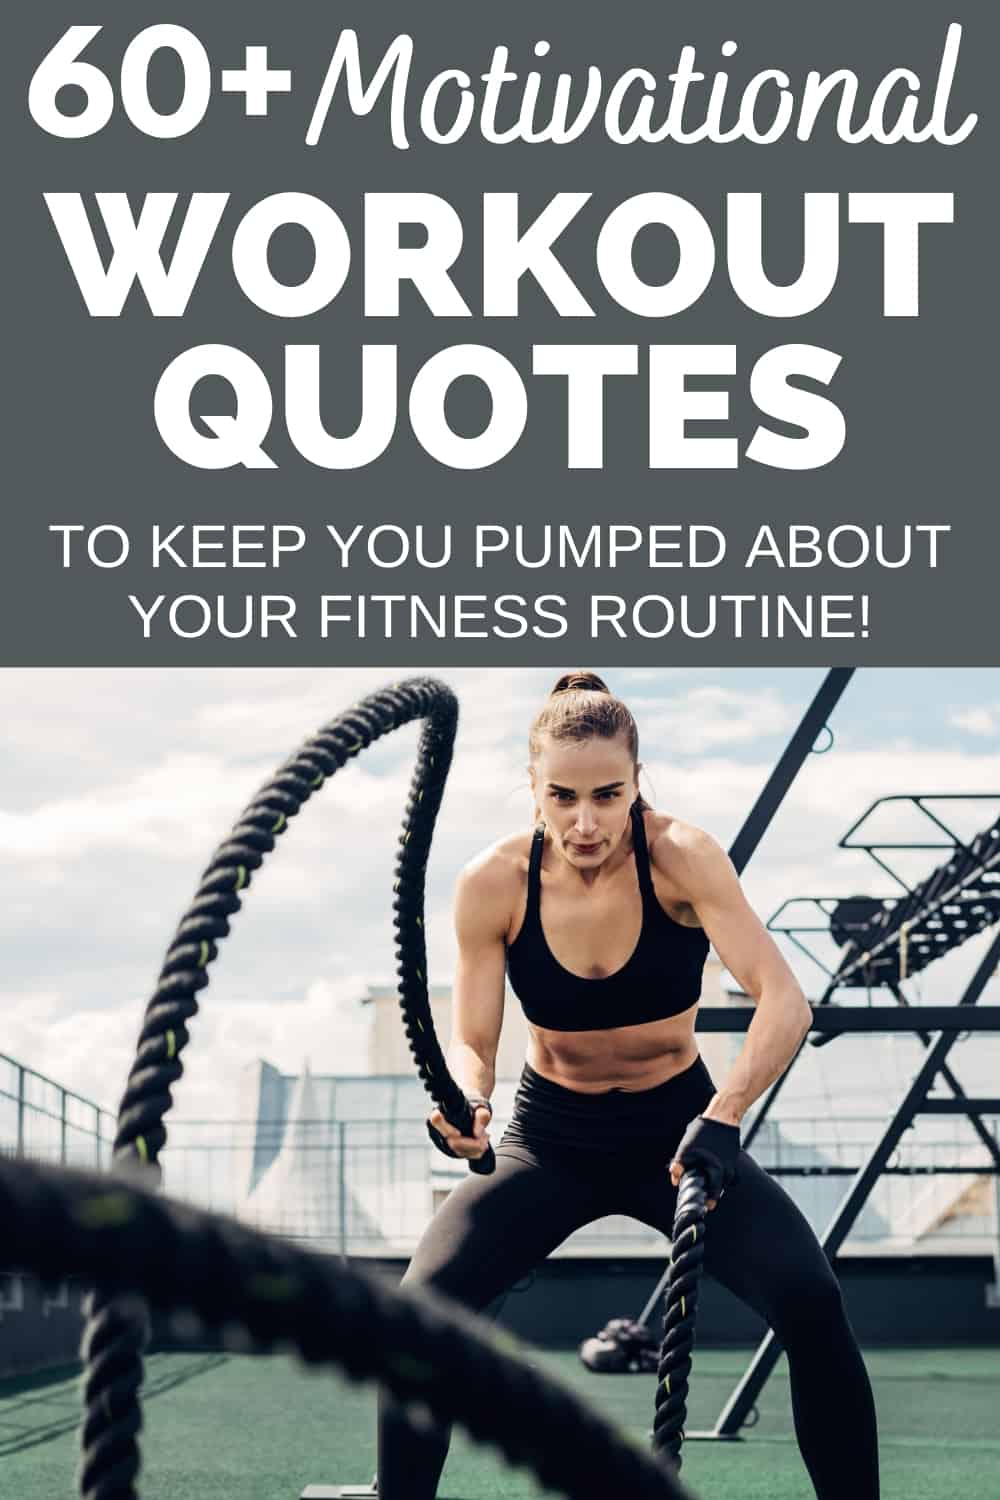 60 Motivational Workout Quotes To Help You Stick To A Fitness Routine